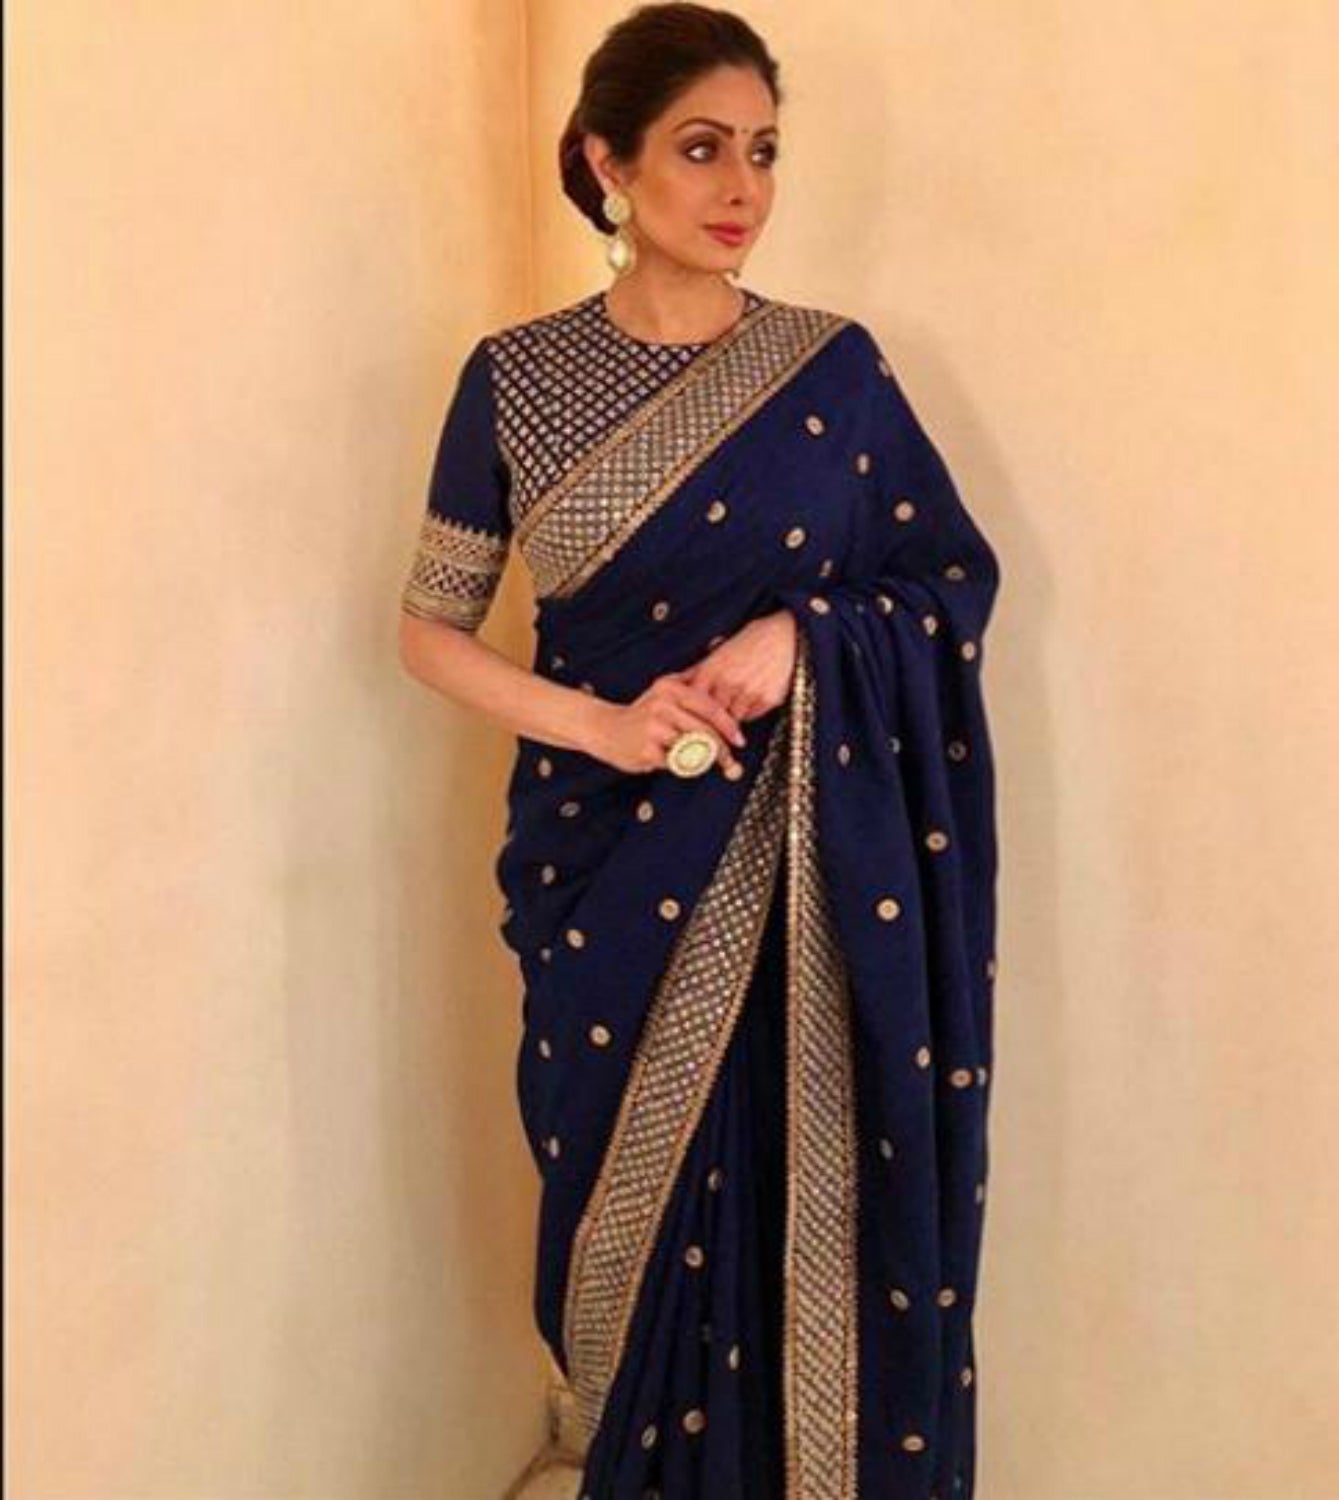 7 MUST HAVE REGIONAL SAREES FOR EVERY INDIAN WOMEN